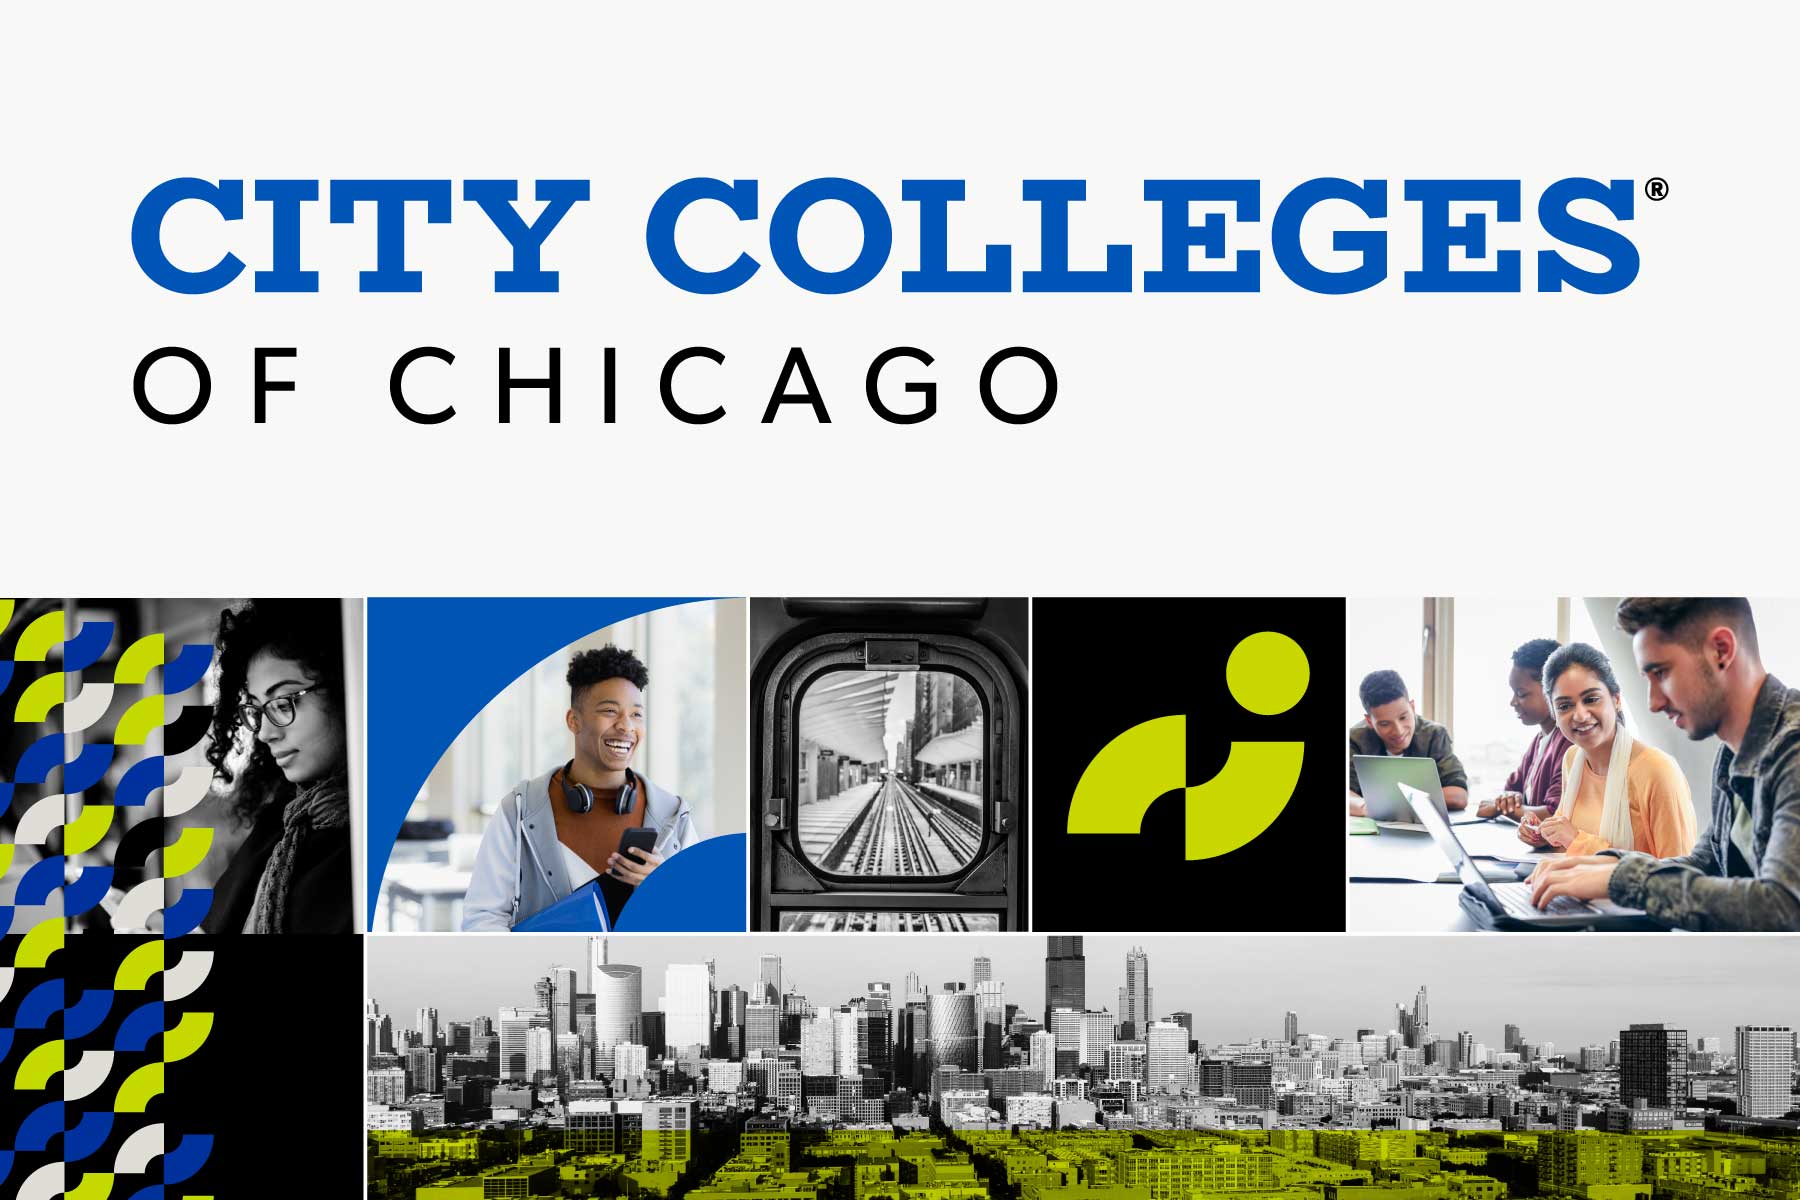 It’s Here! The New Brand at City Colleges City Colleges of Chicago